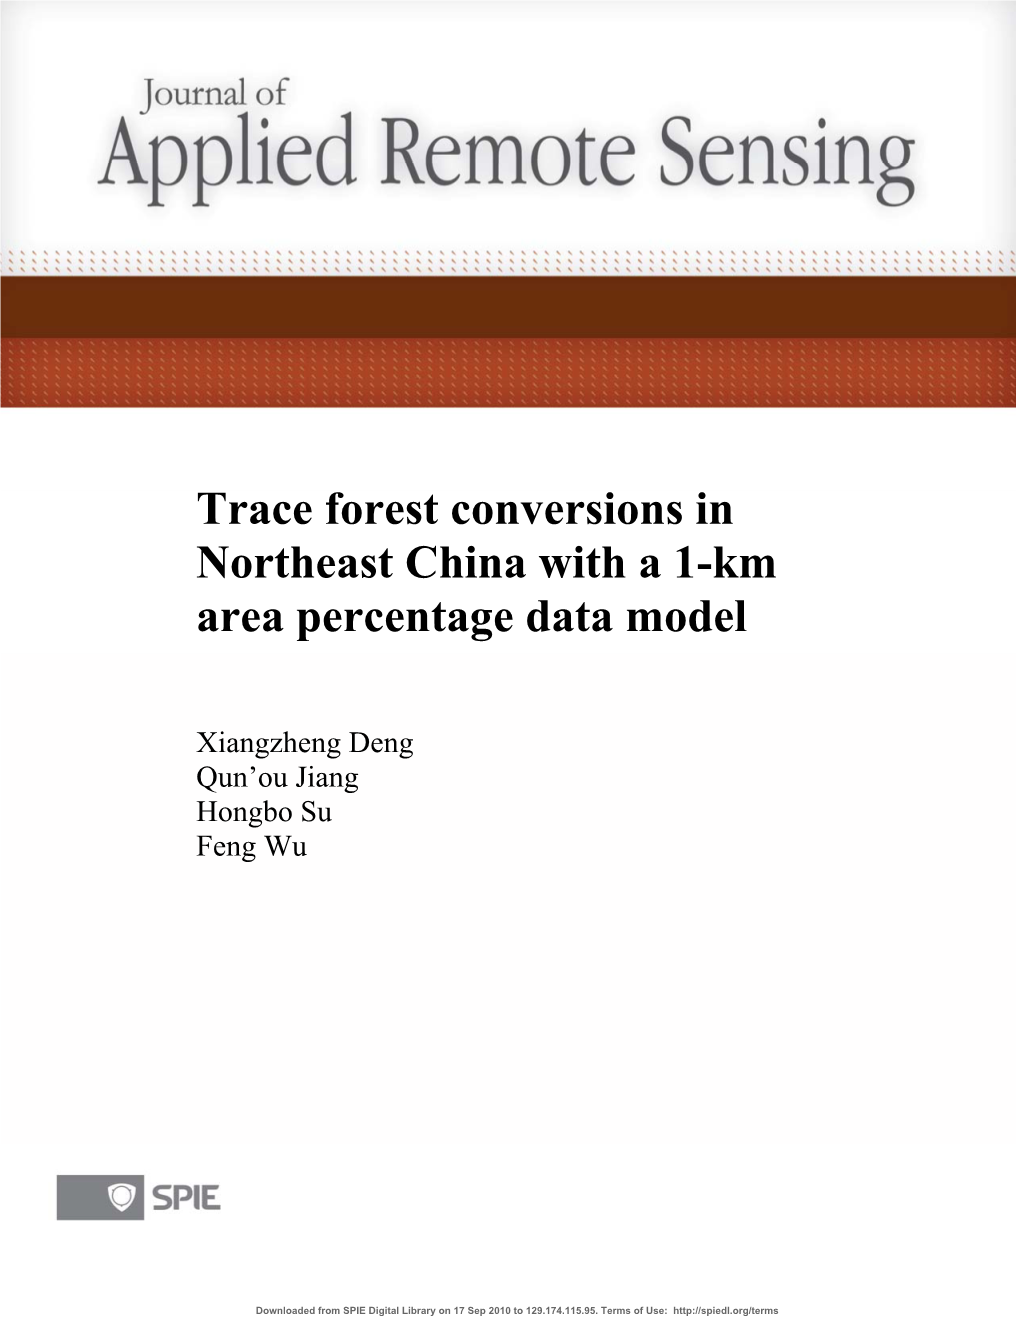 Trace Forest Conversions in Northeast China with a 1-Km Area Percentage Data Model